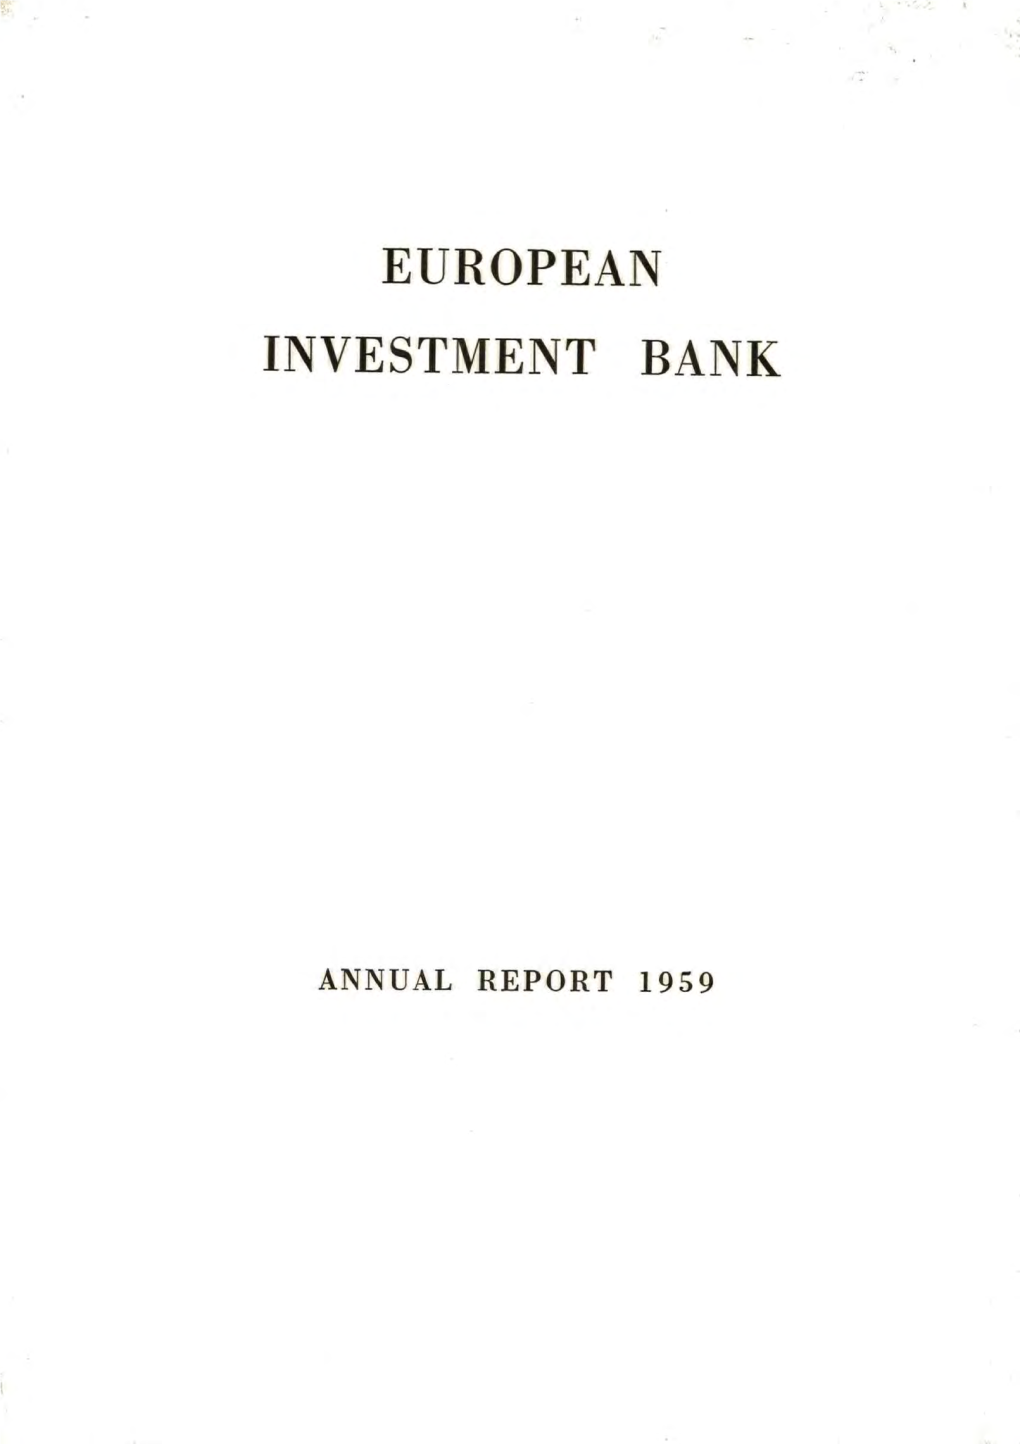 ANNUAL REPORT 1959 EUROPEAN INVESTMENT BANK for Its Accounts and Balance Sheet, the European Investment Bank Uses the Unit of Account As Defined in Art